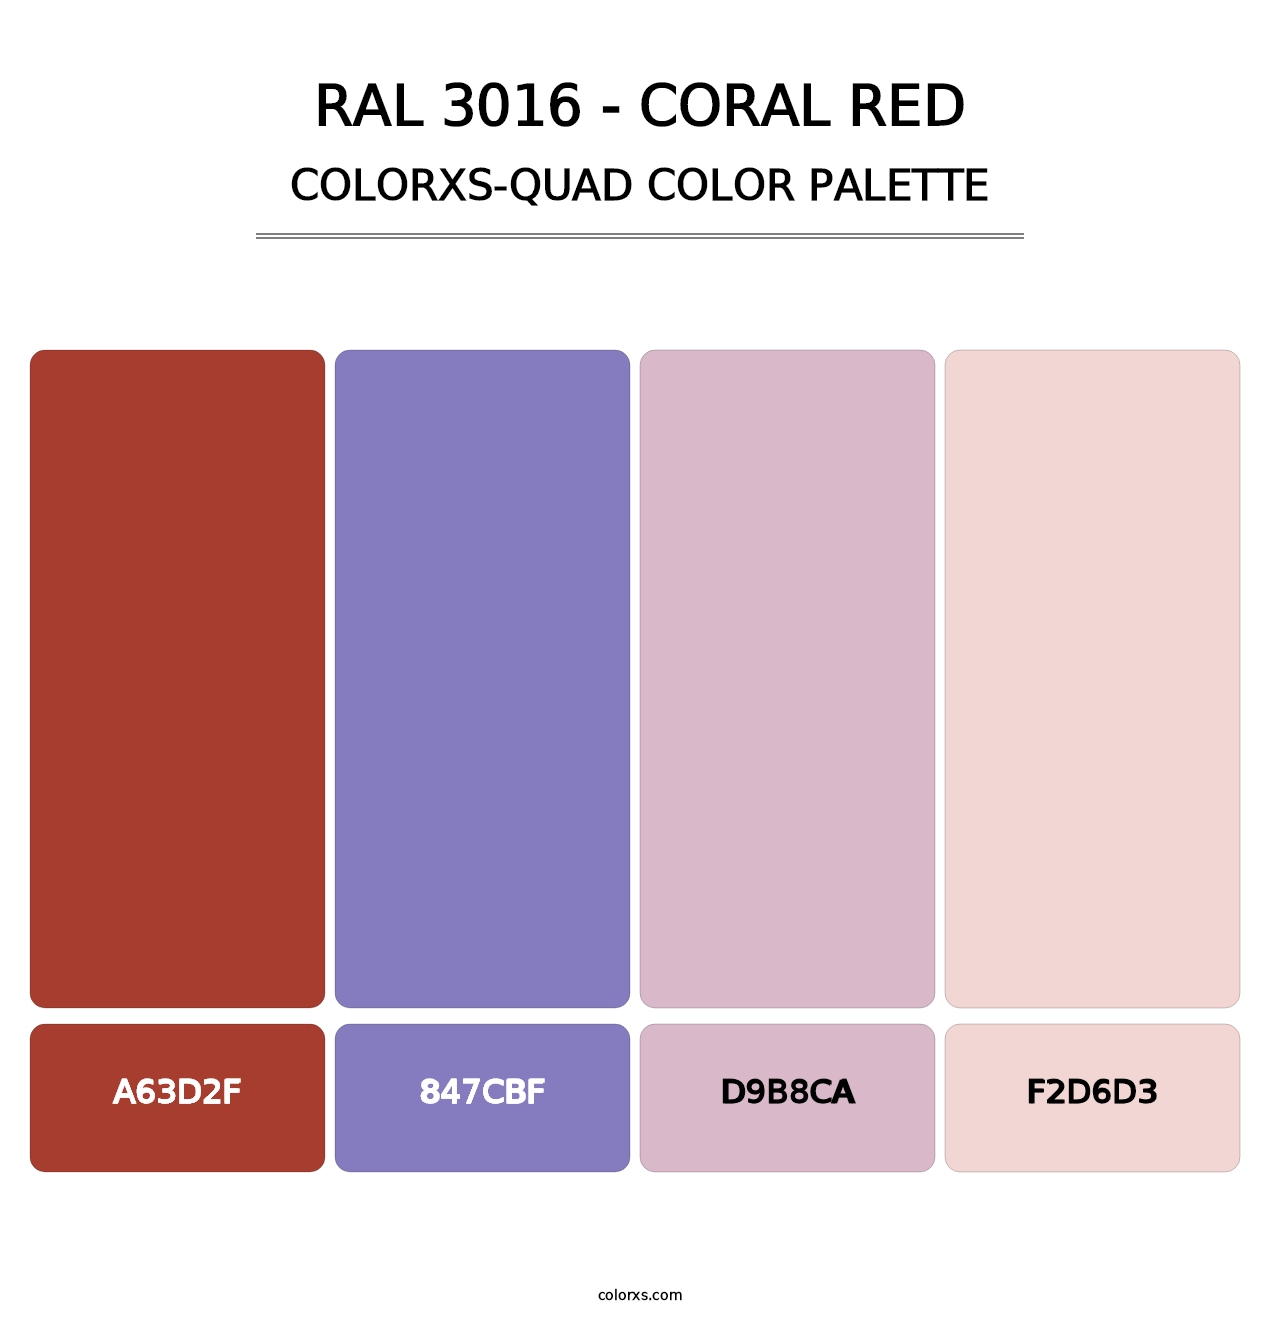 RAL 3016 - Coral Red - Colorxs Quad Palette